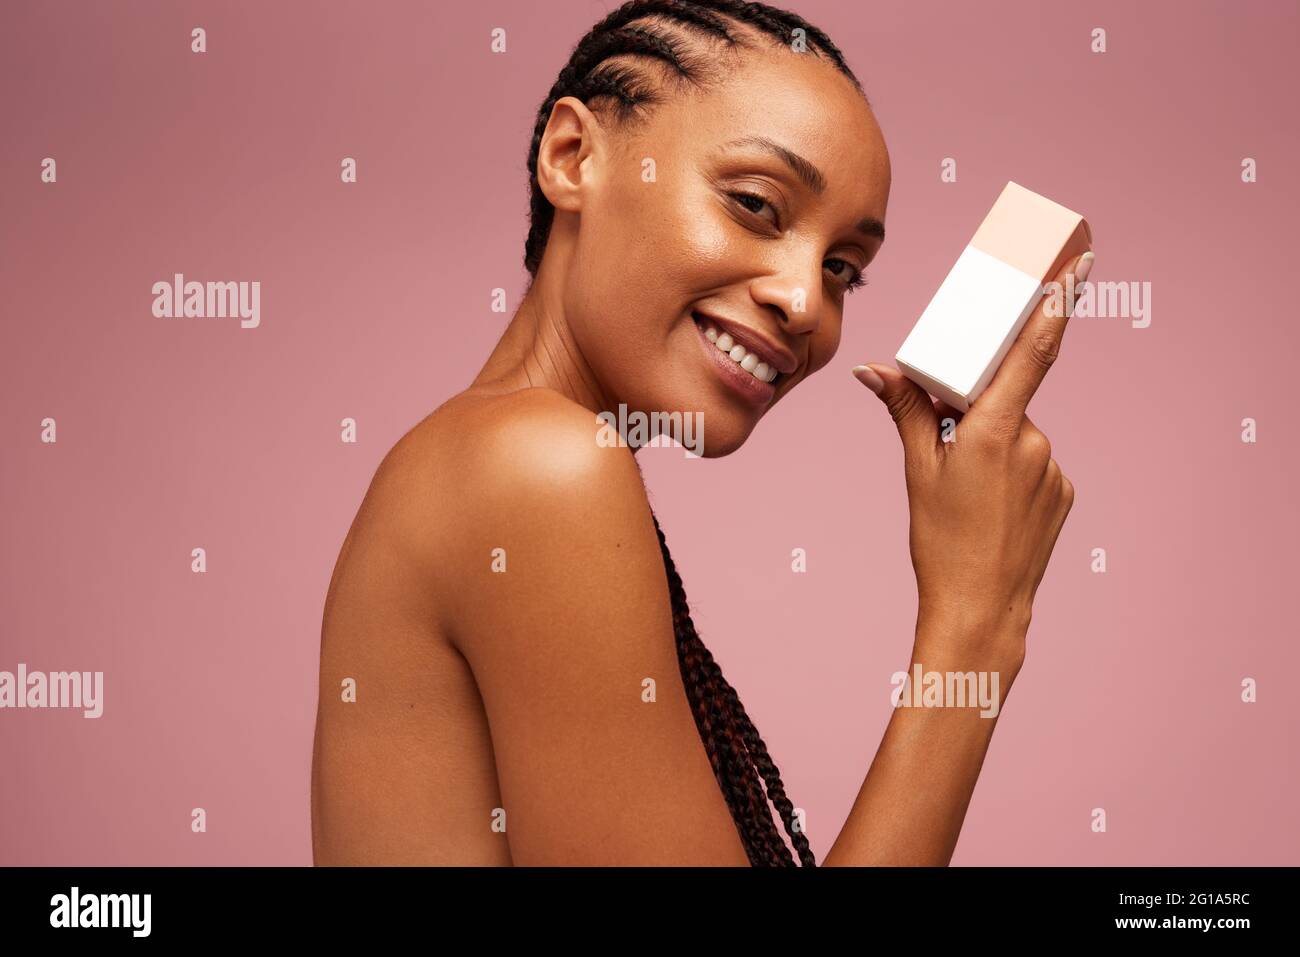 Attractive female model holding beauty product against pink background. Beautiful woman with cosmetic product looking at camera. Stock Photo